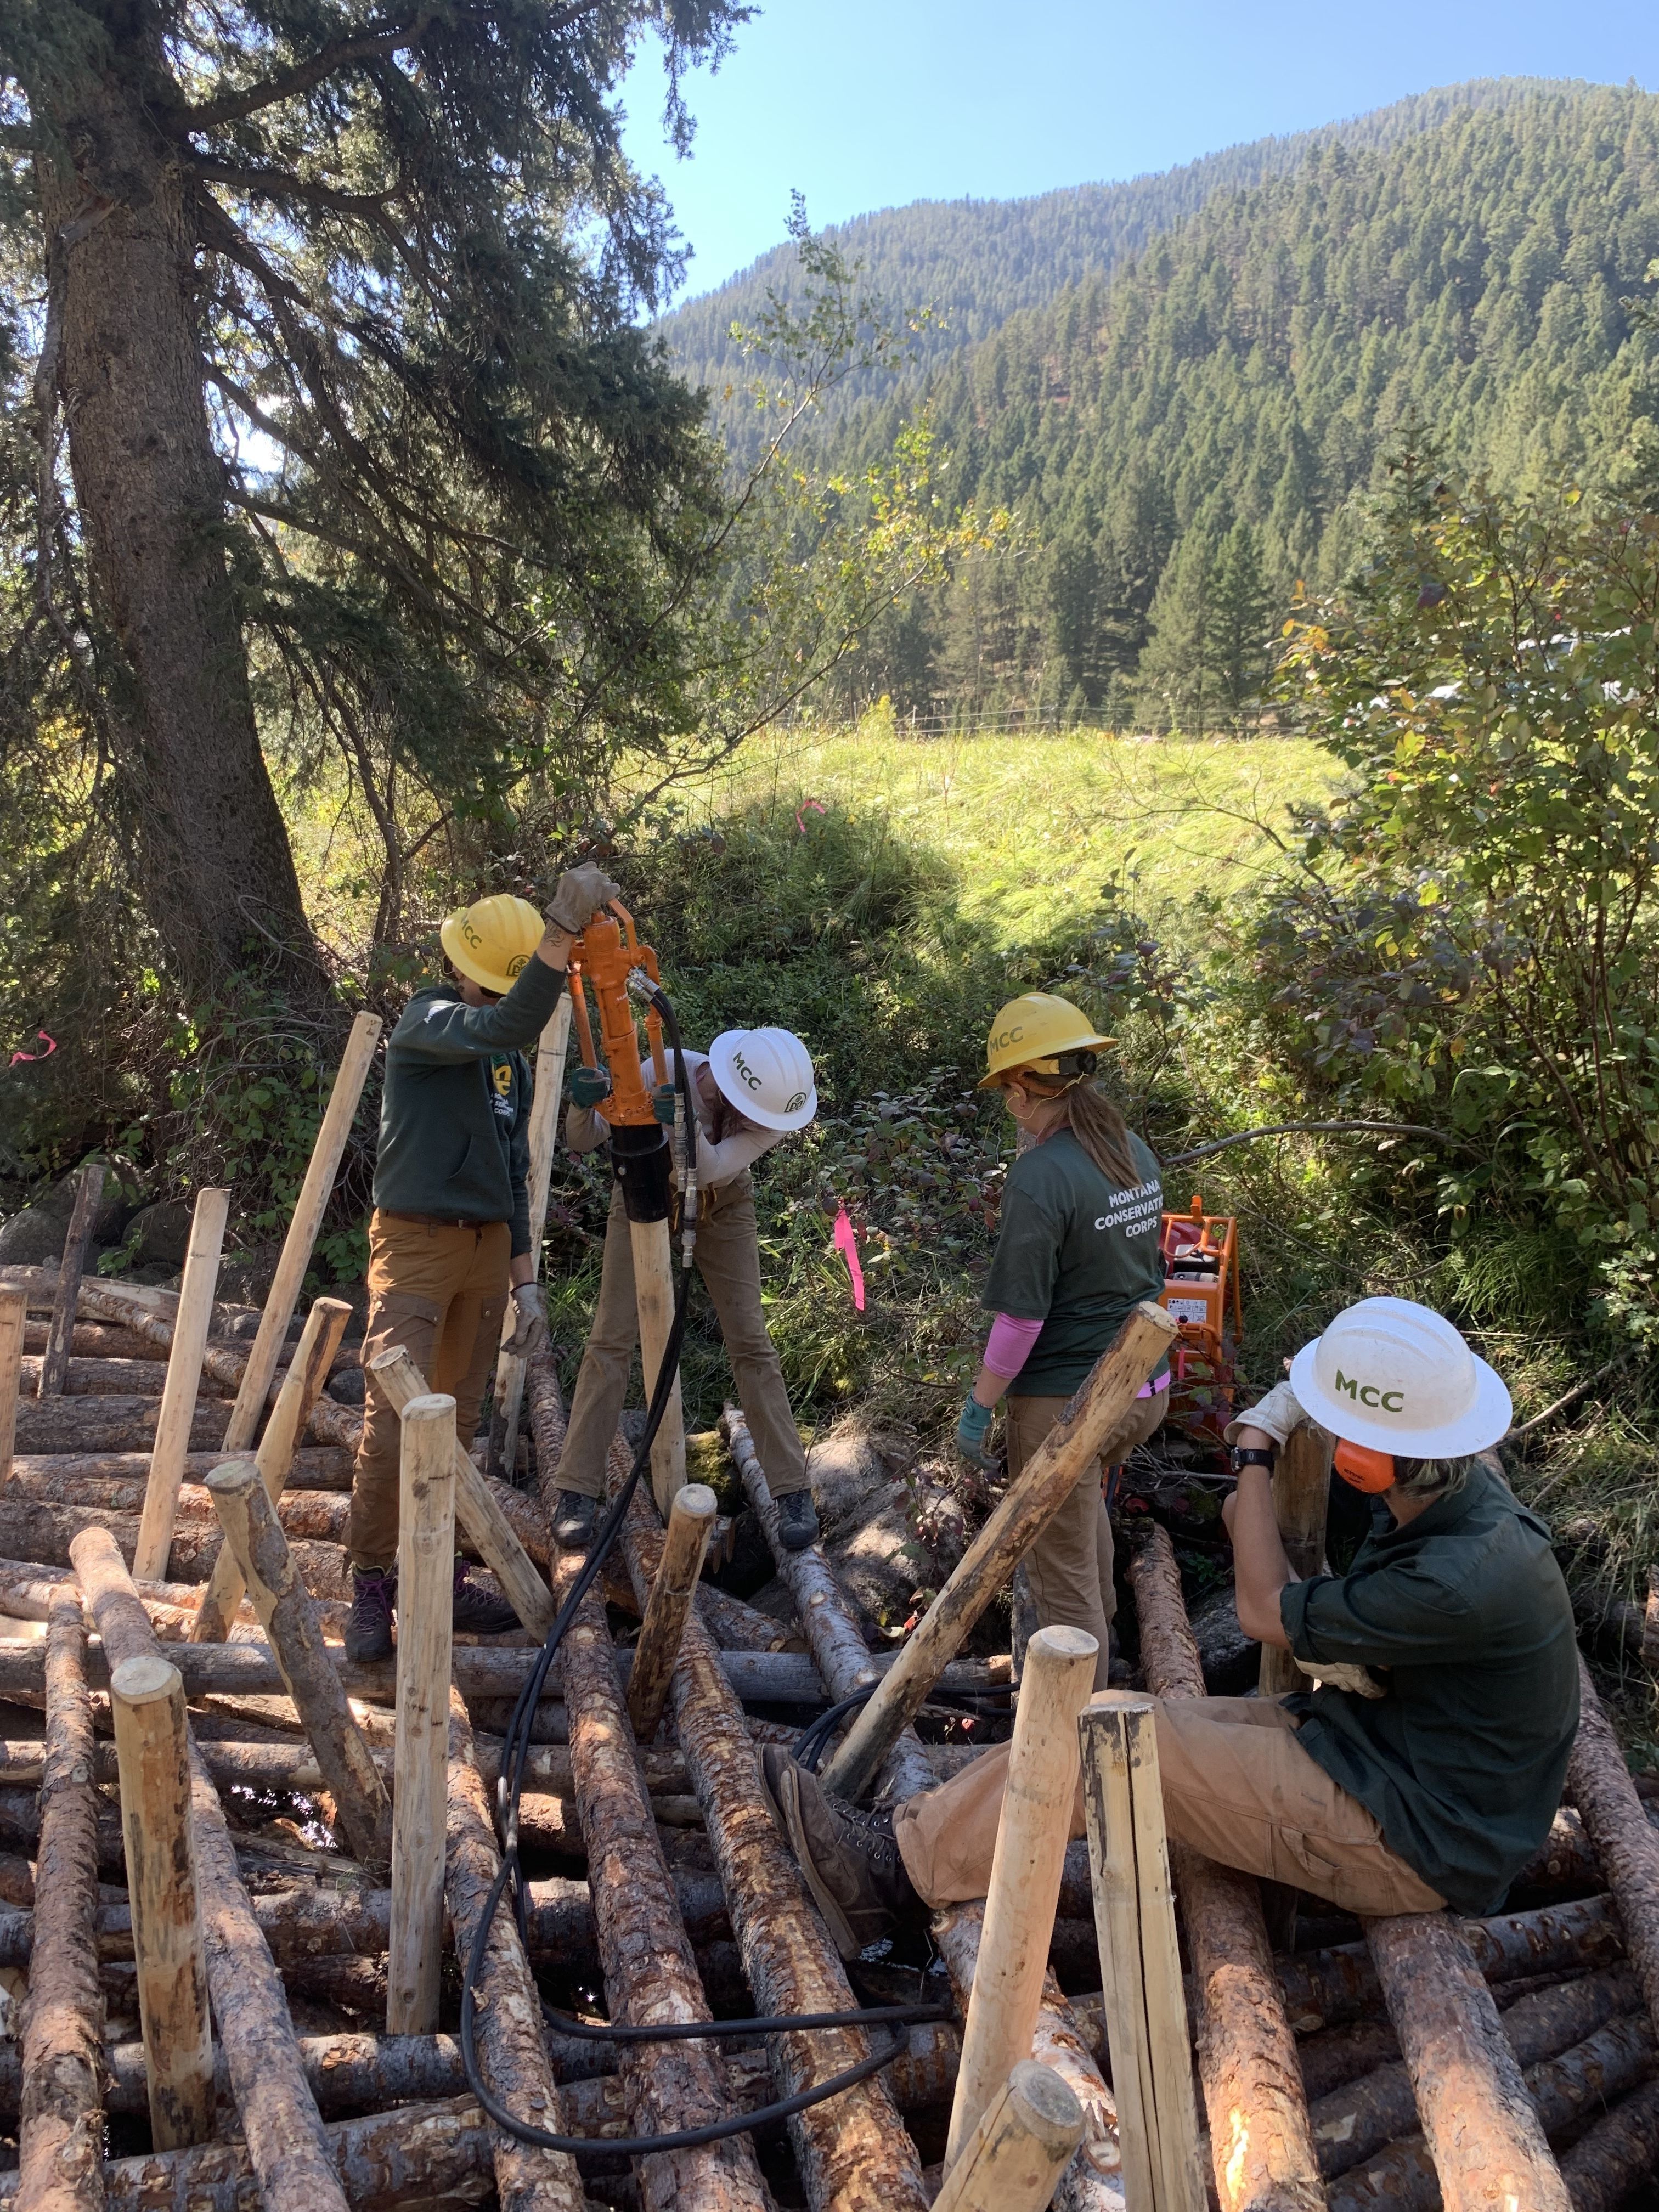 Crew members are placing logs into a large logjam.